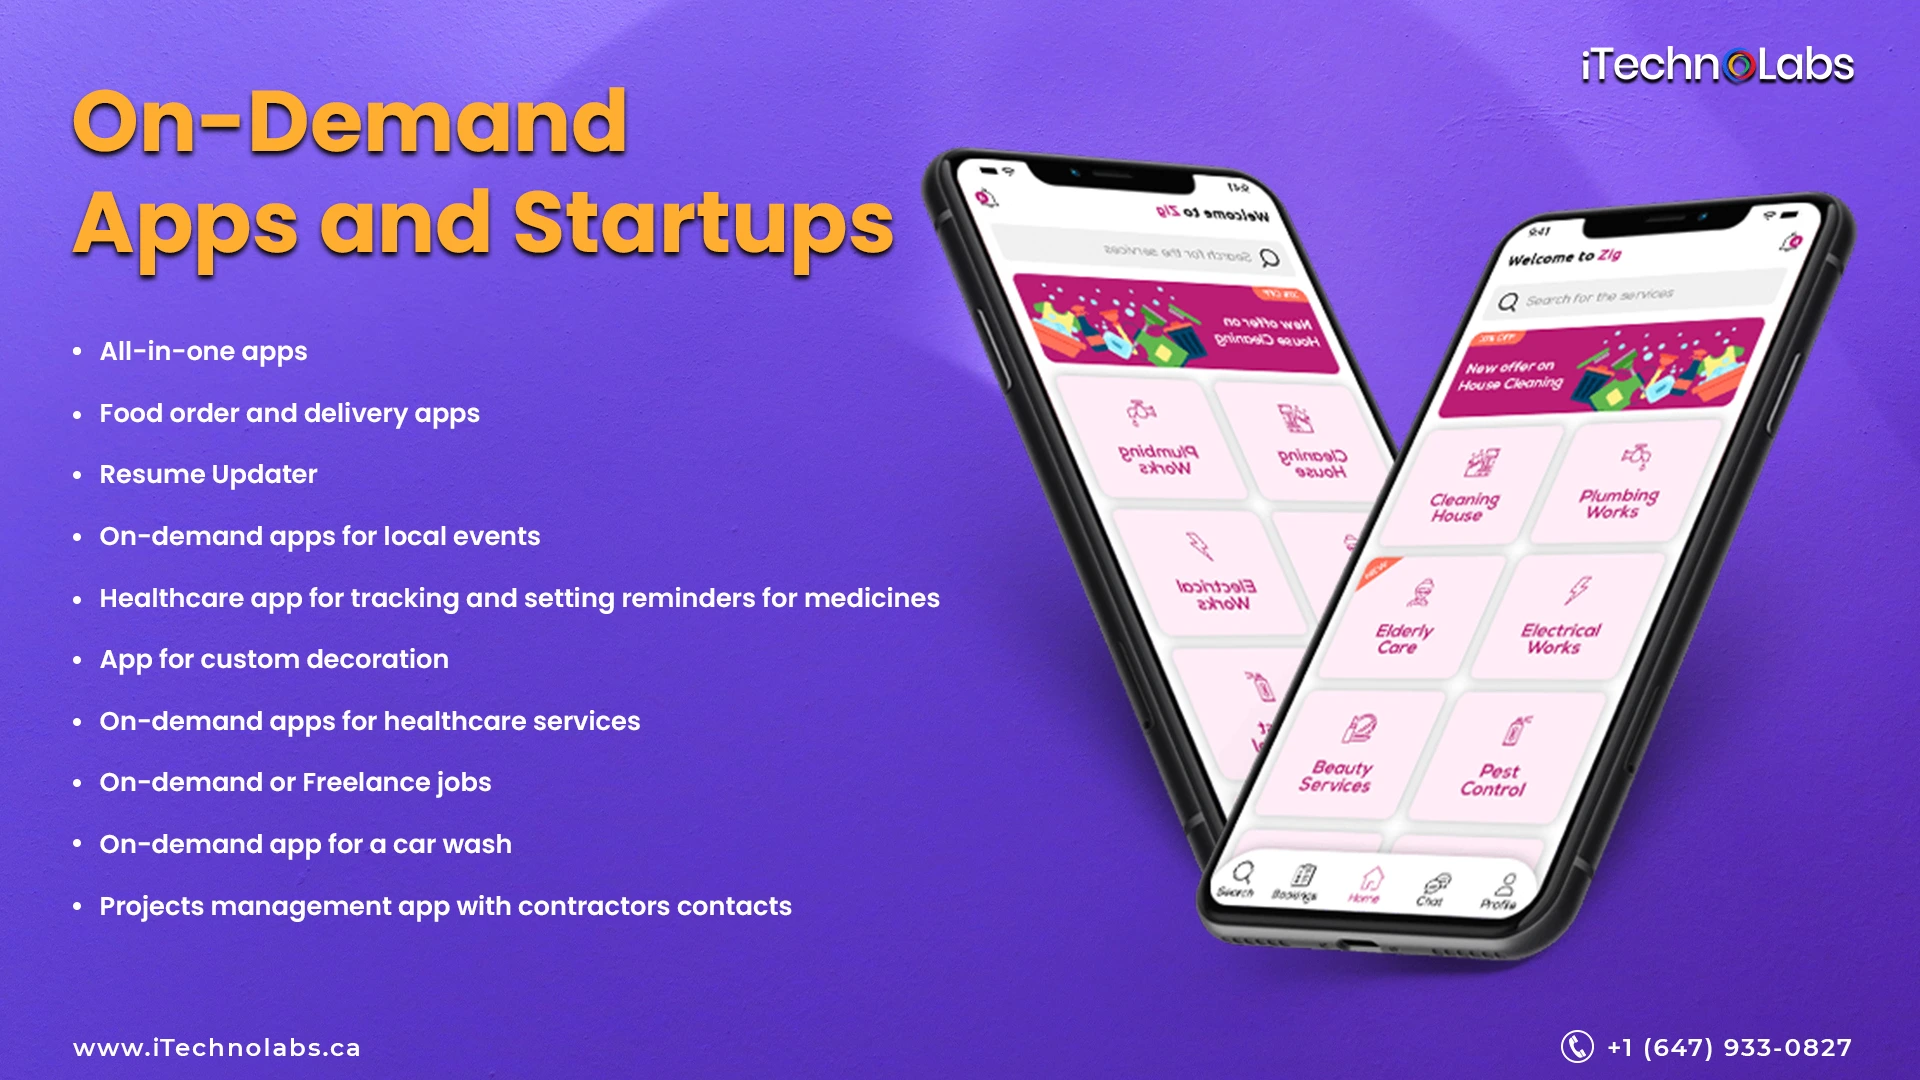 on-demand apps and startups itechnolabs